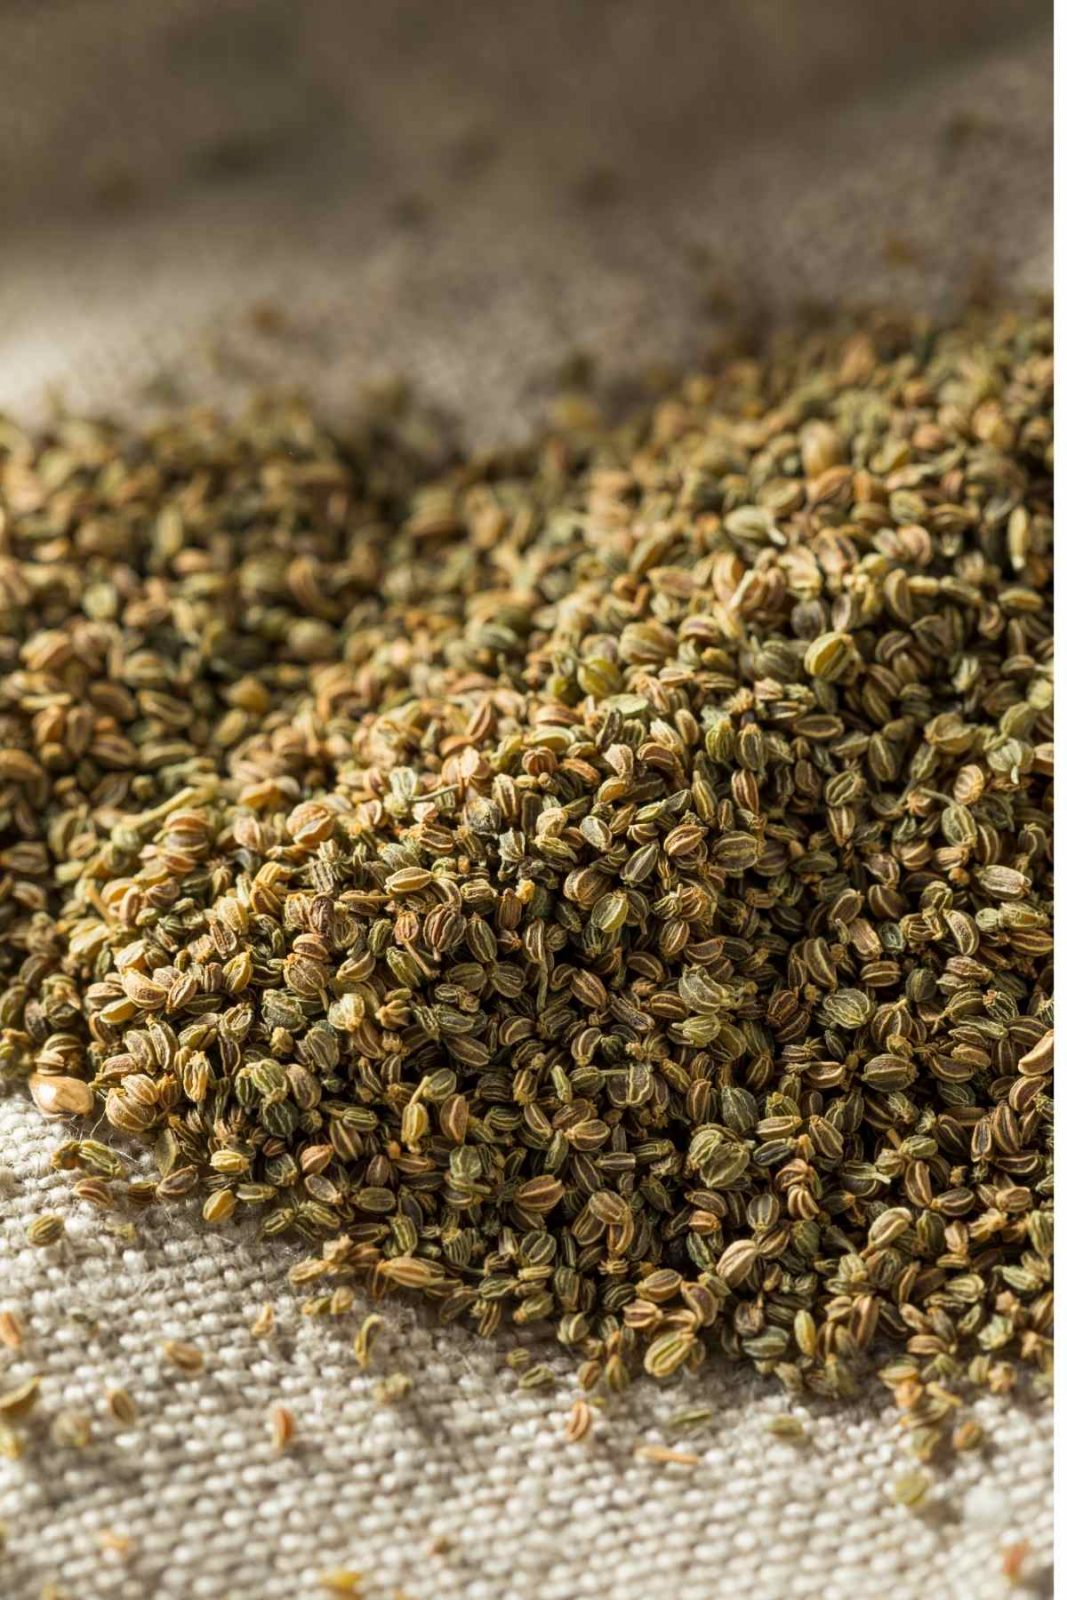 The flavor of dill weed is quite unique due to its earthy and almost grassy essence. It is a very fragrant herb that provides a great addition to Middle Eastern and North African cuisine. If your recipe calls for dill but you don’t have any, there are some great Dill Substitutes you can use.